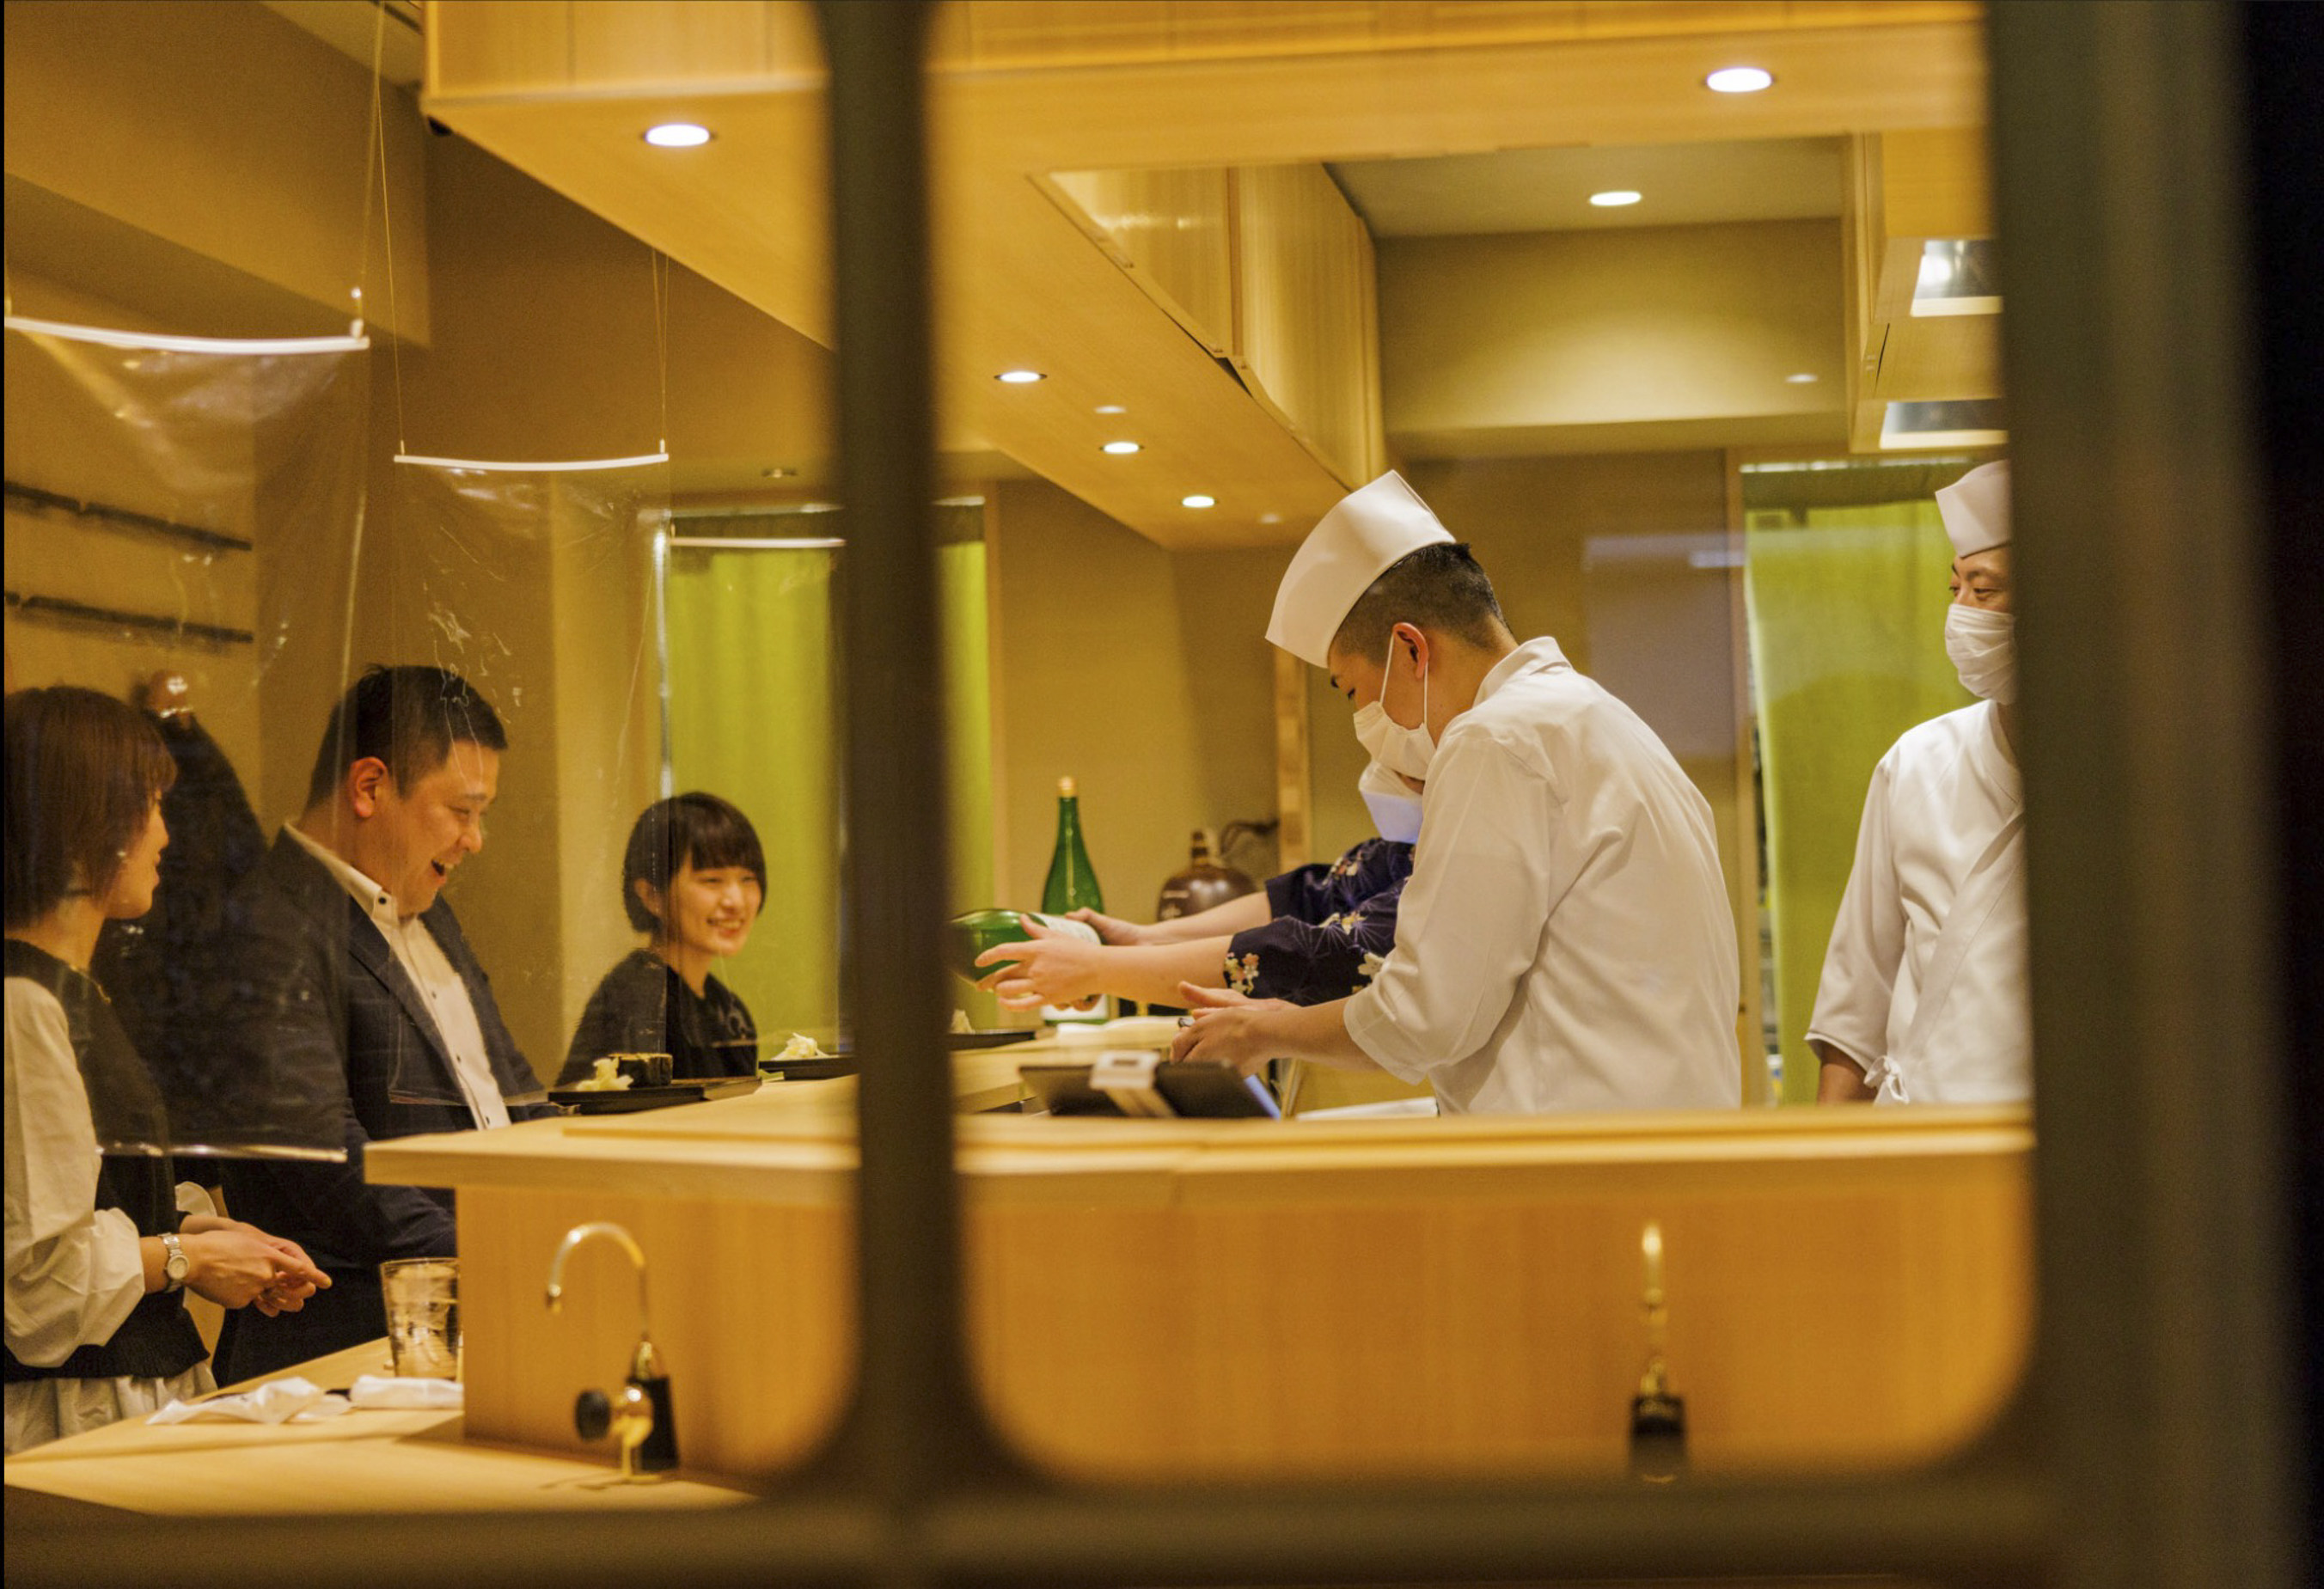 These standing sushi restaurants in Tokyo offer top quality cuisine